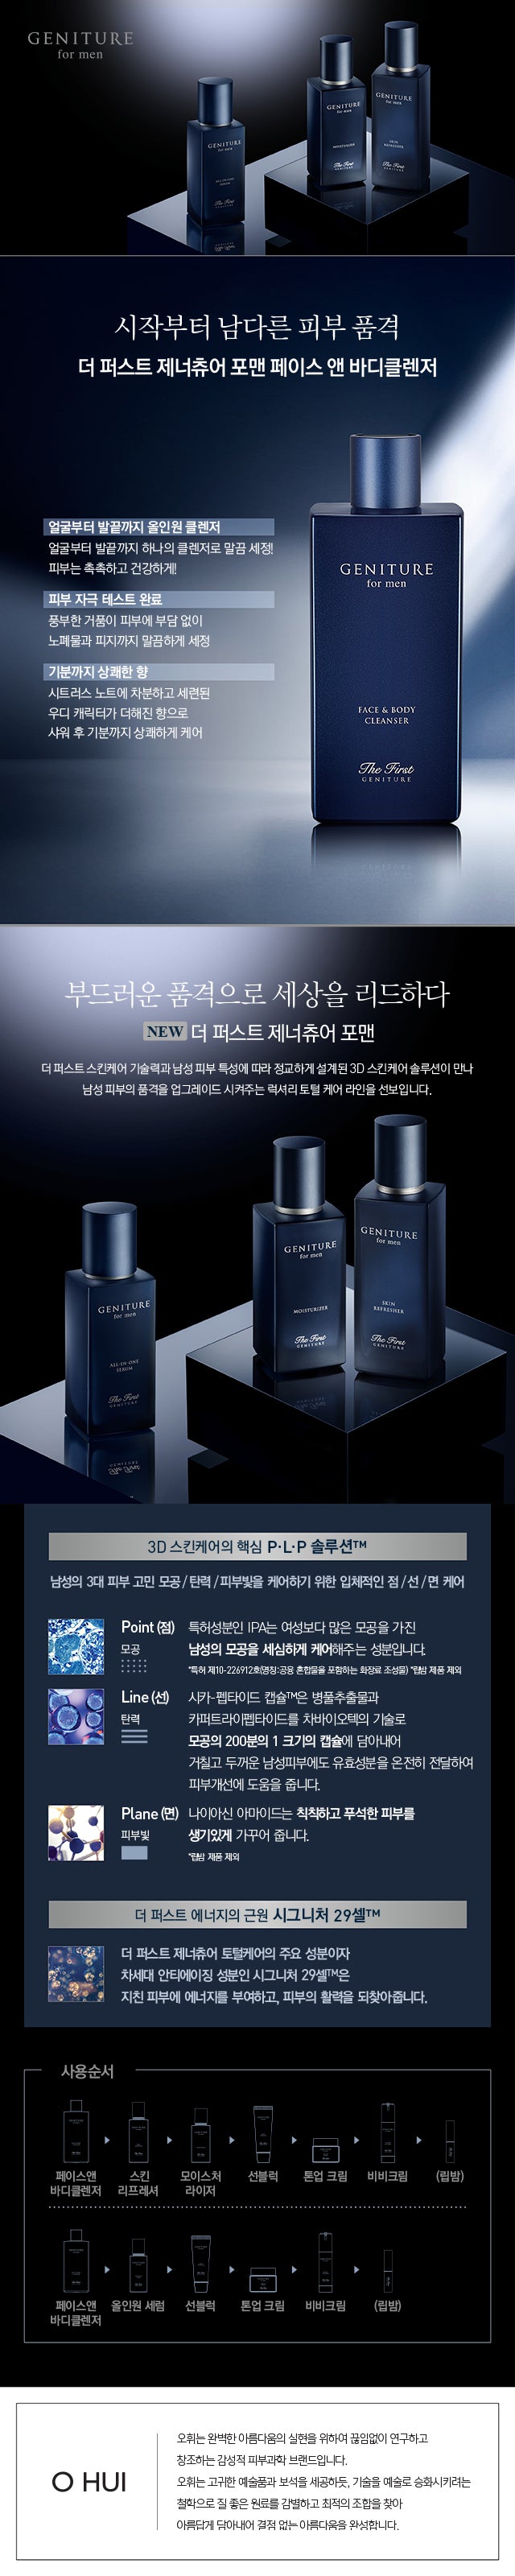 O Hui_The First Geniture For Men Face & Body Cleanser 300ml_1